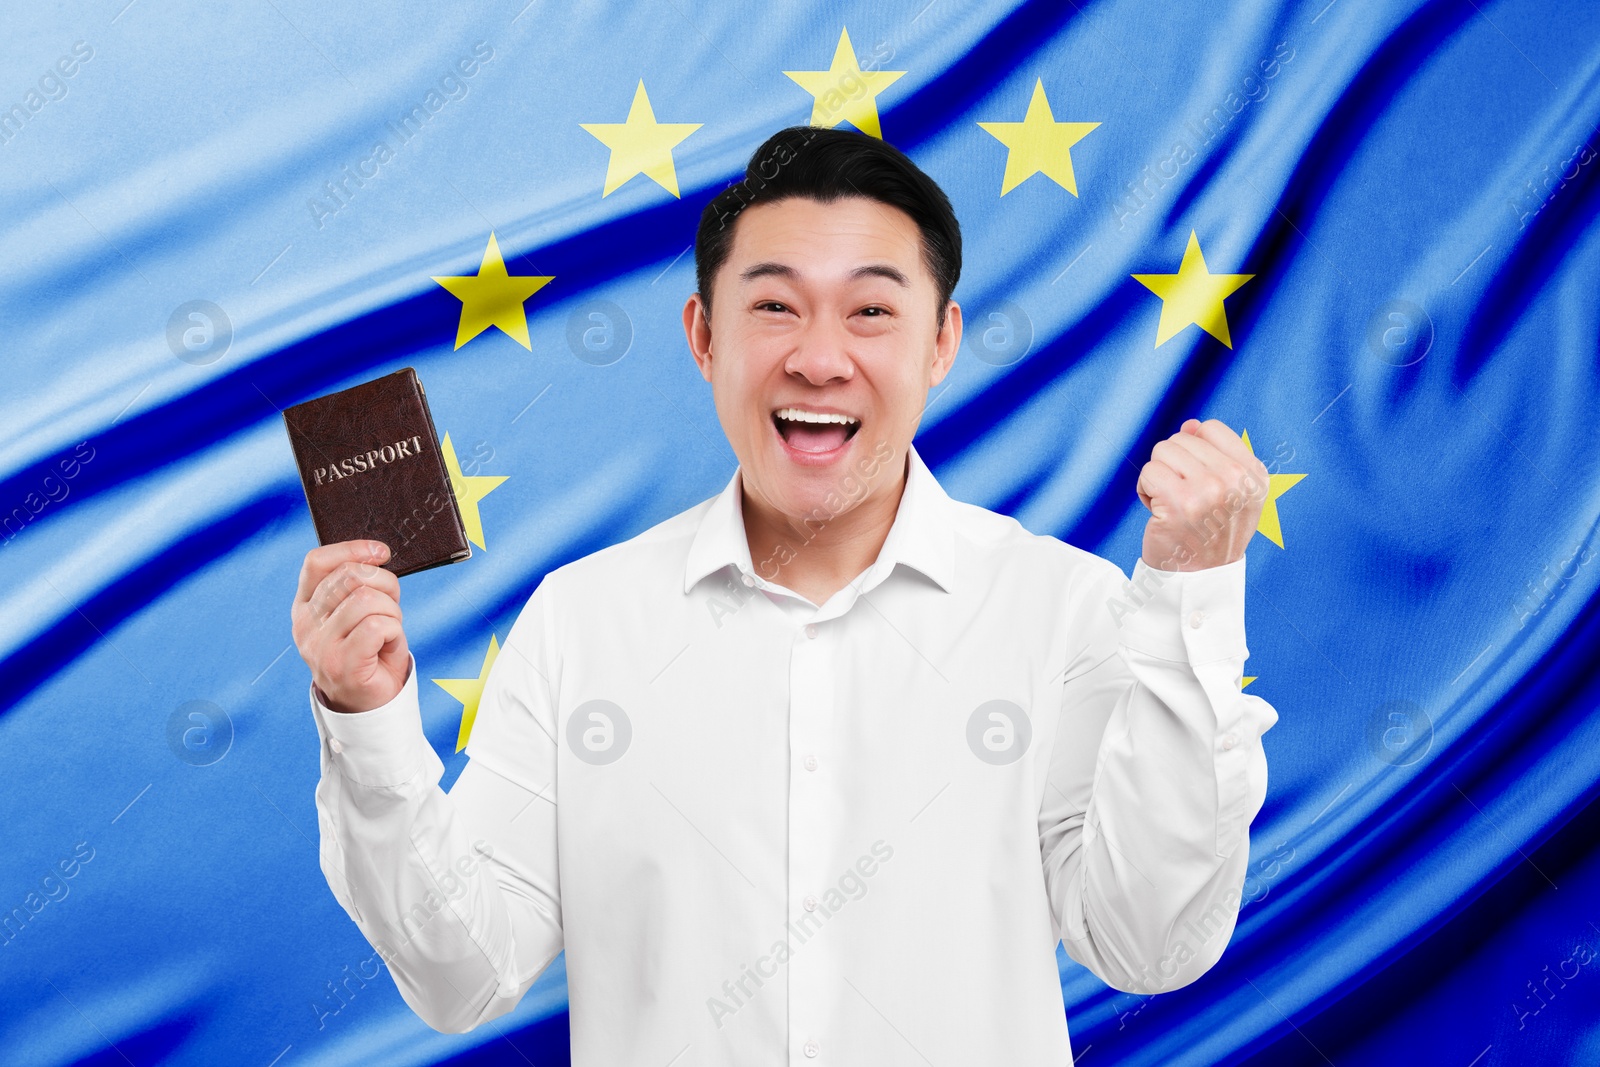 Image of Immigration. Happy man with passport against flag of European Union